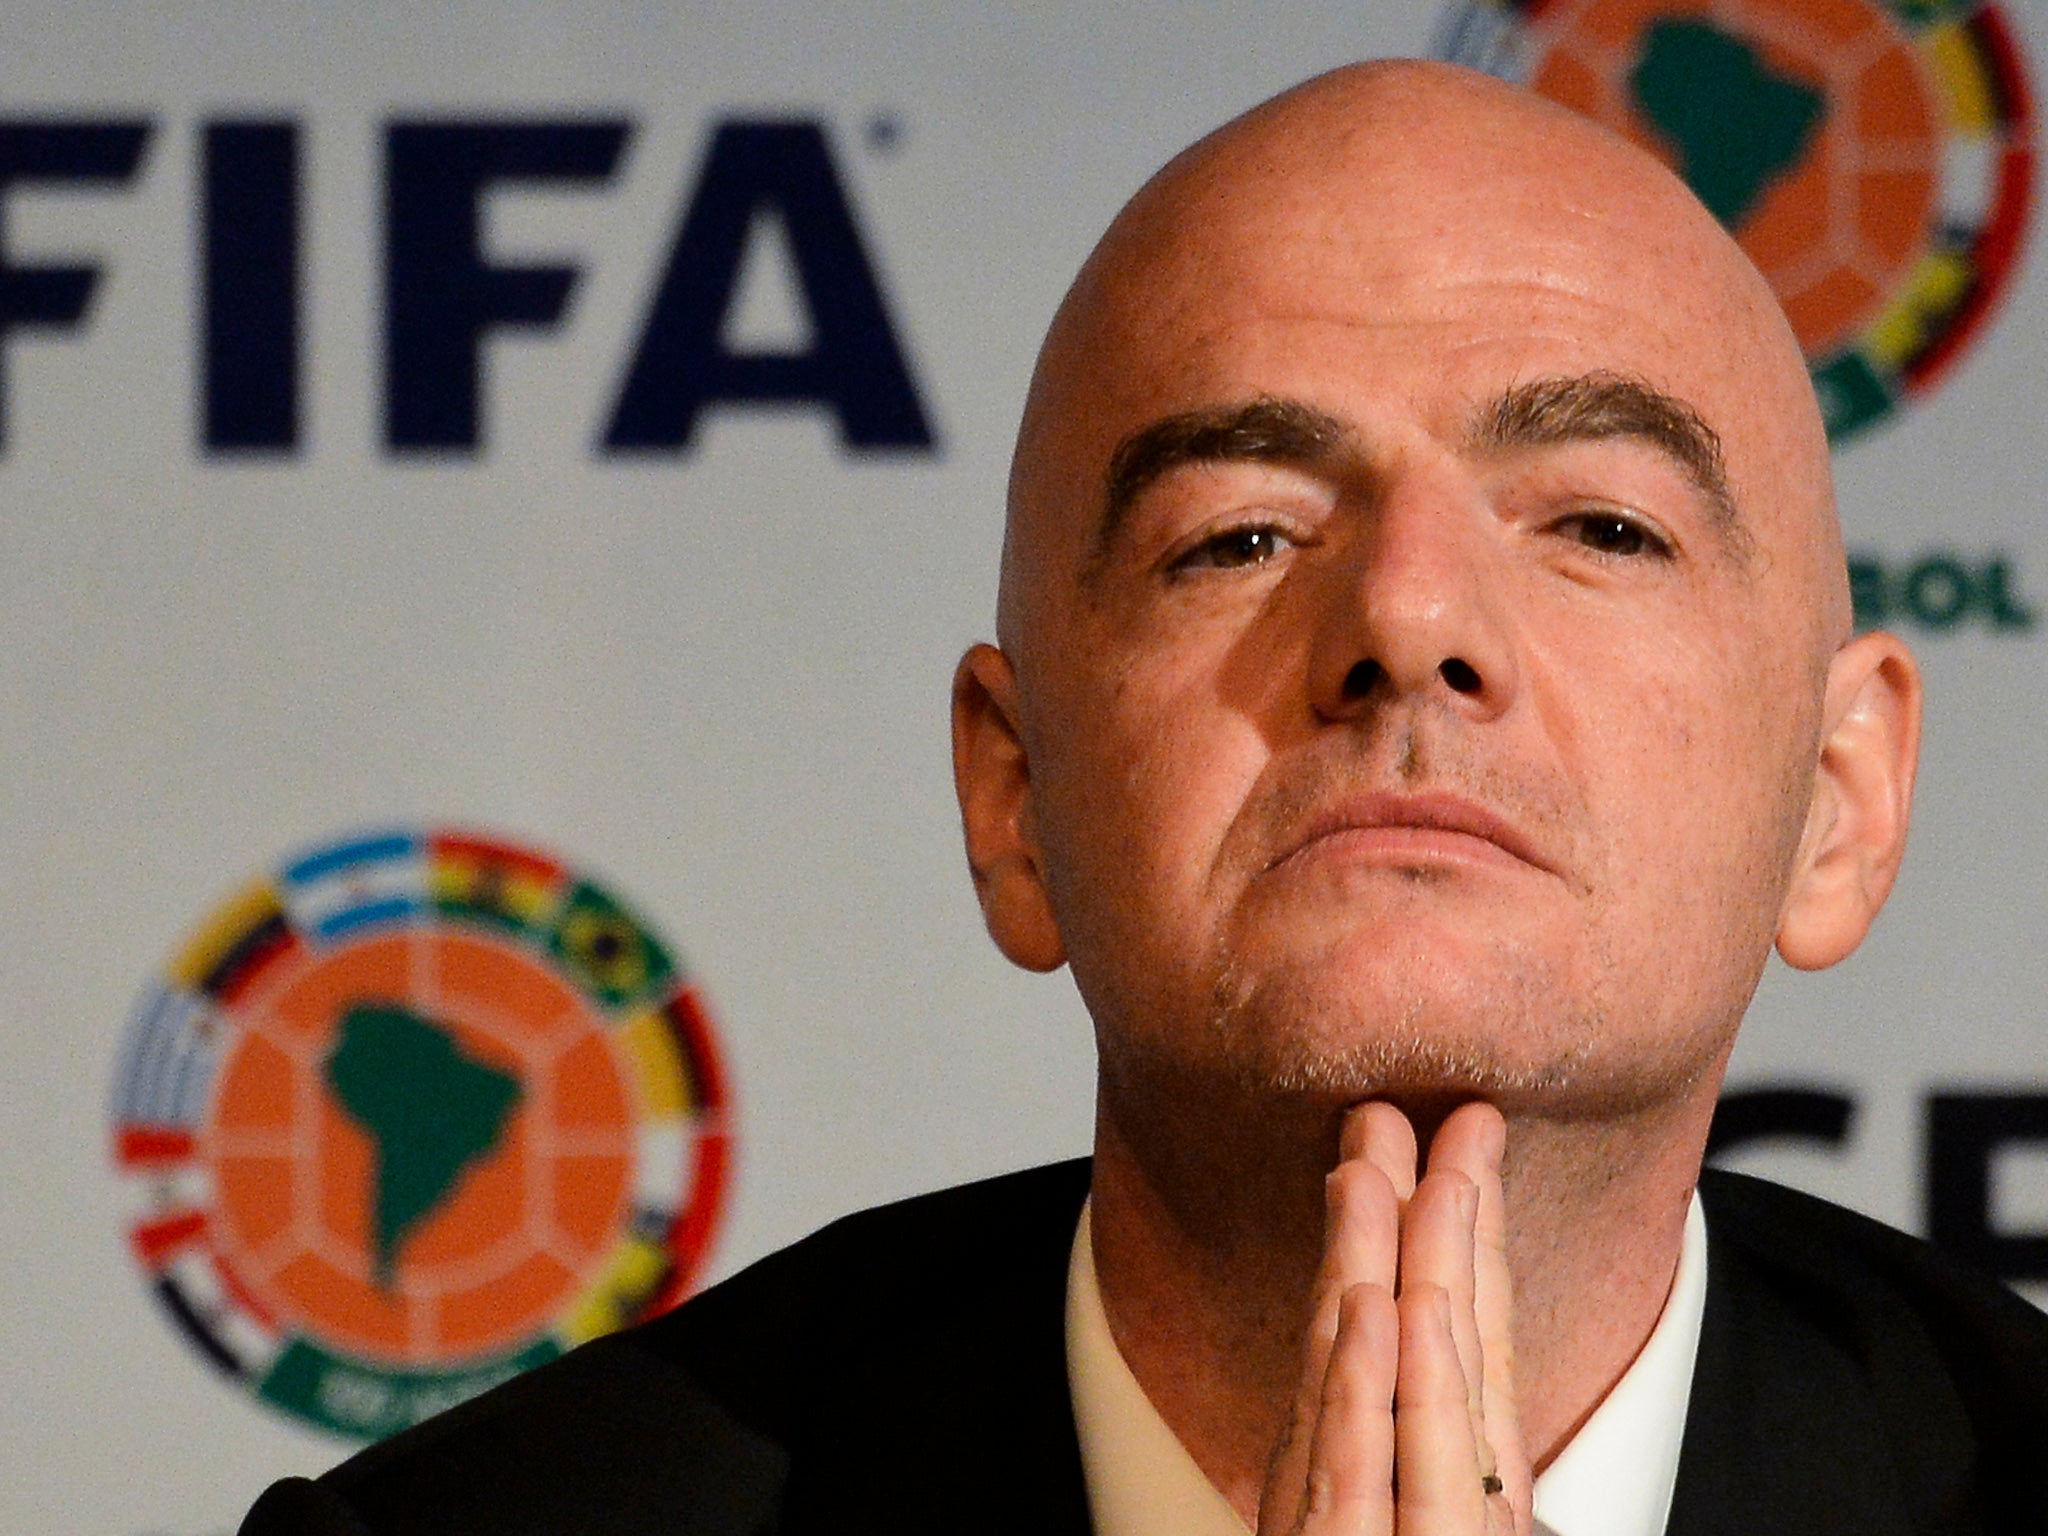 Gianni Infantino was director of legal services at Uefa when the contracts exposed in the Panama Papers were agreed.